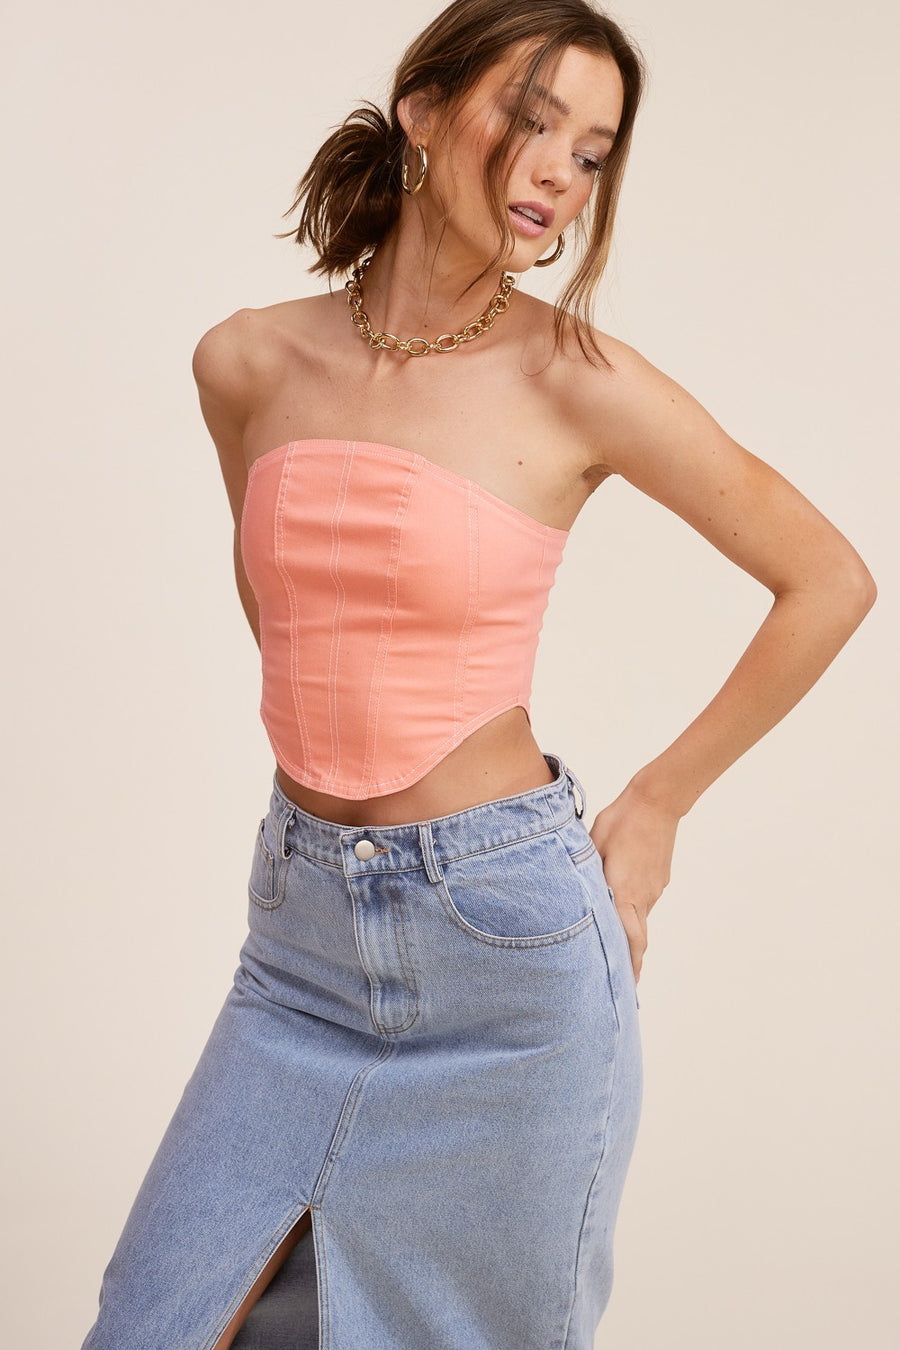 Coral tube top with zipper in the back. 